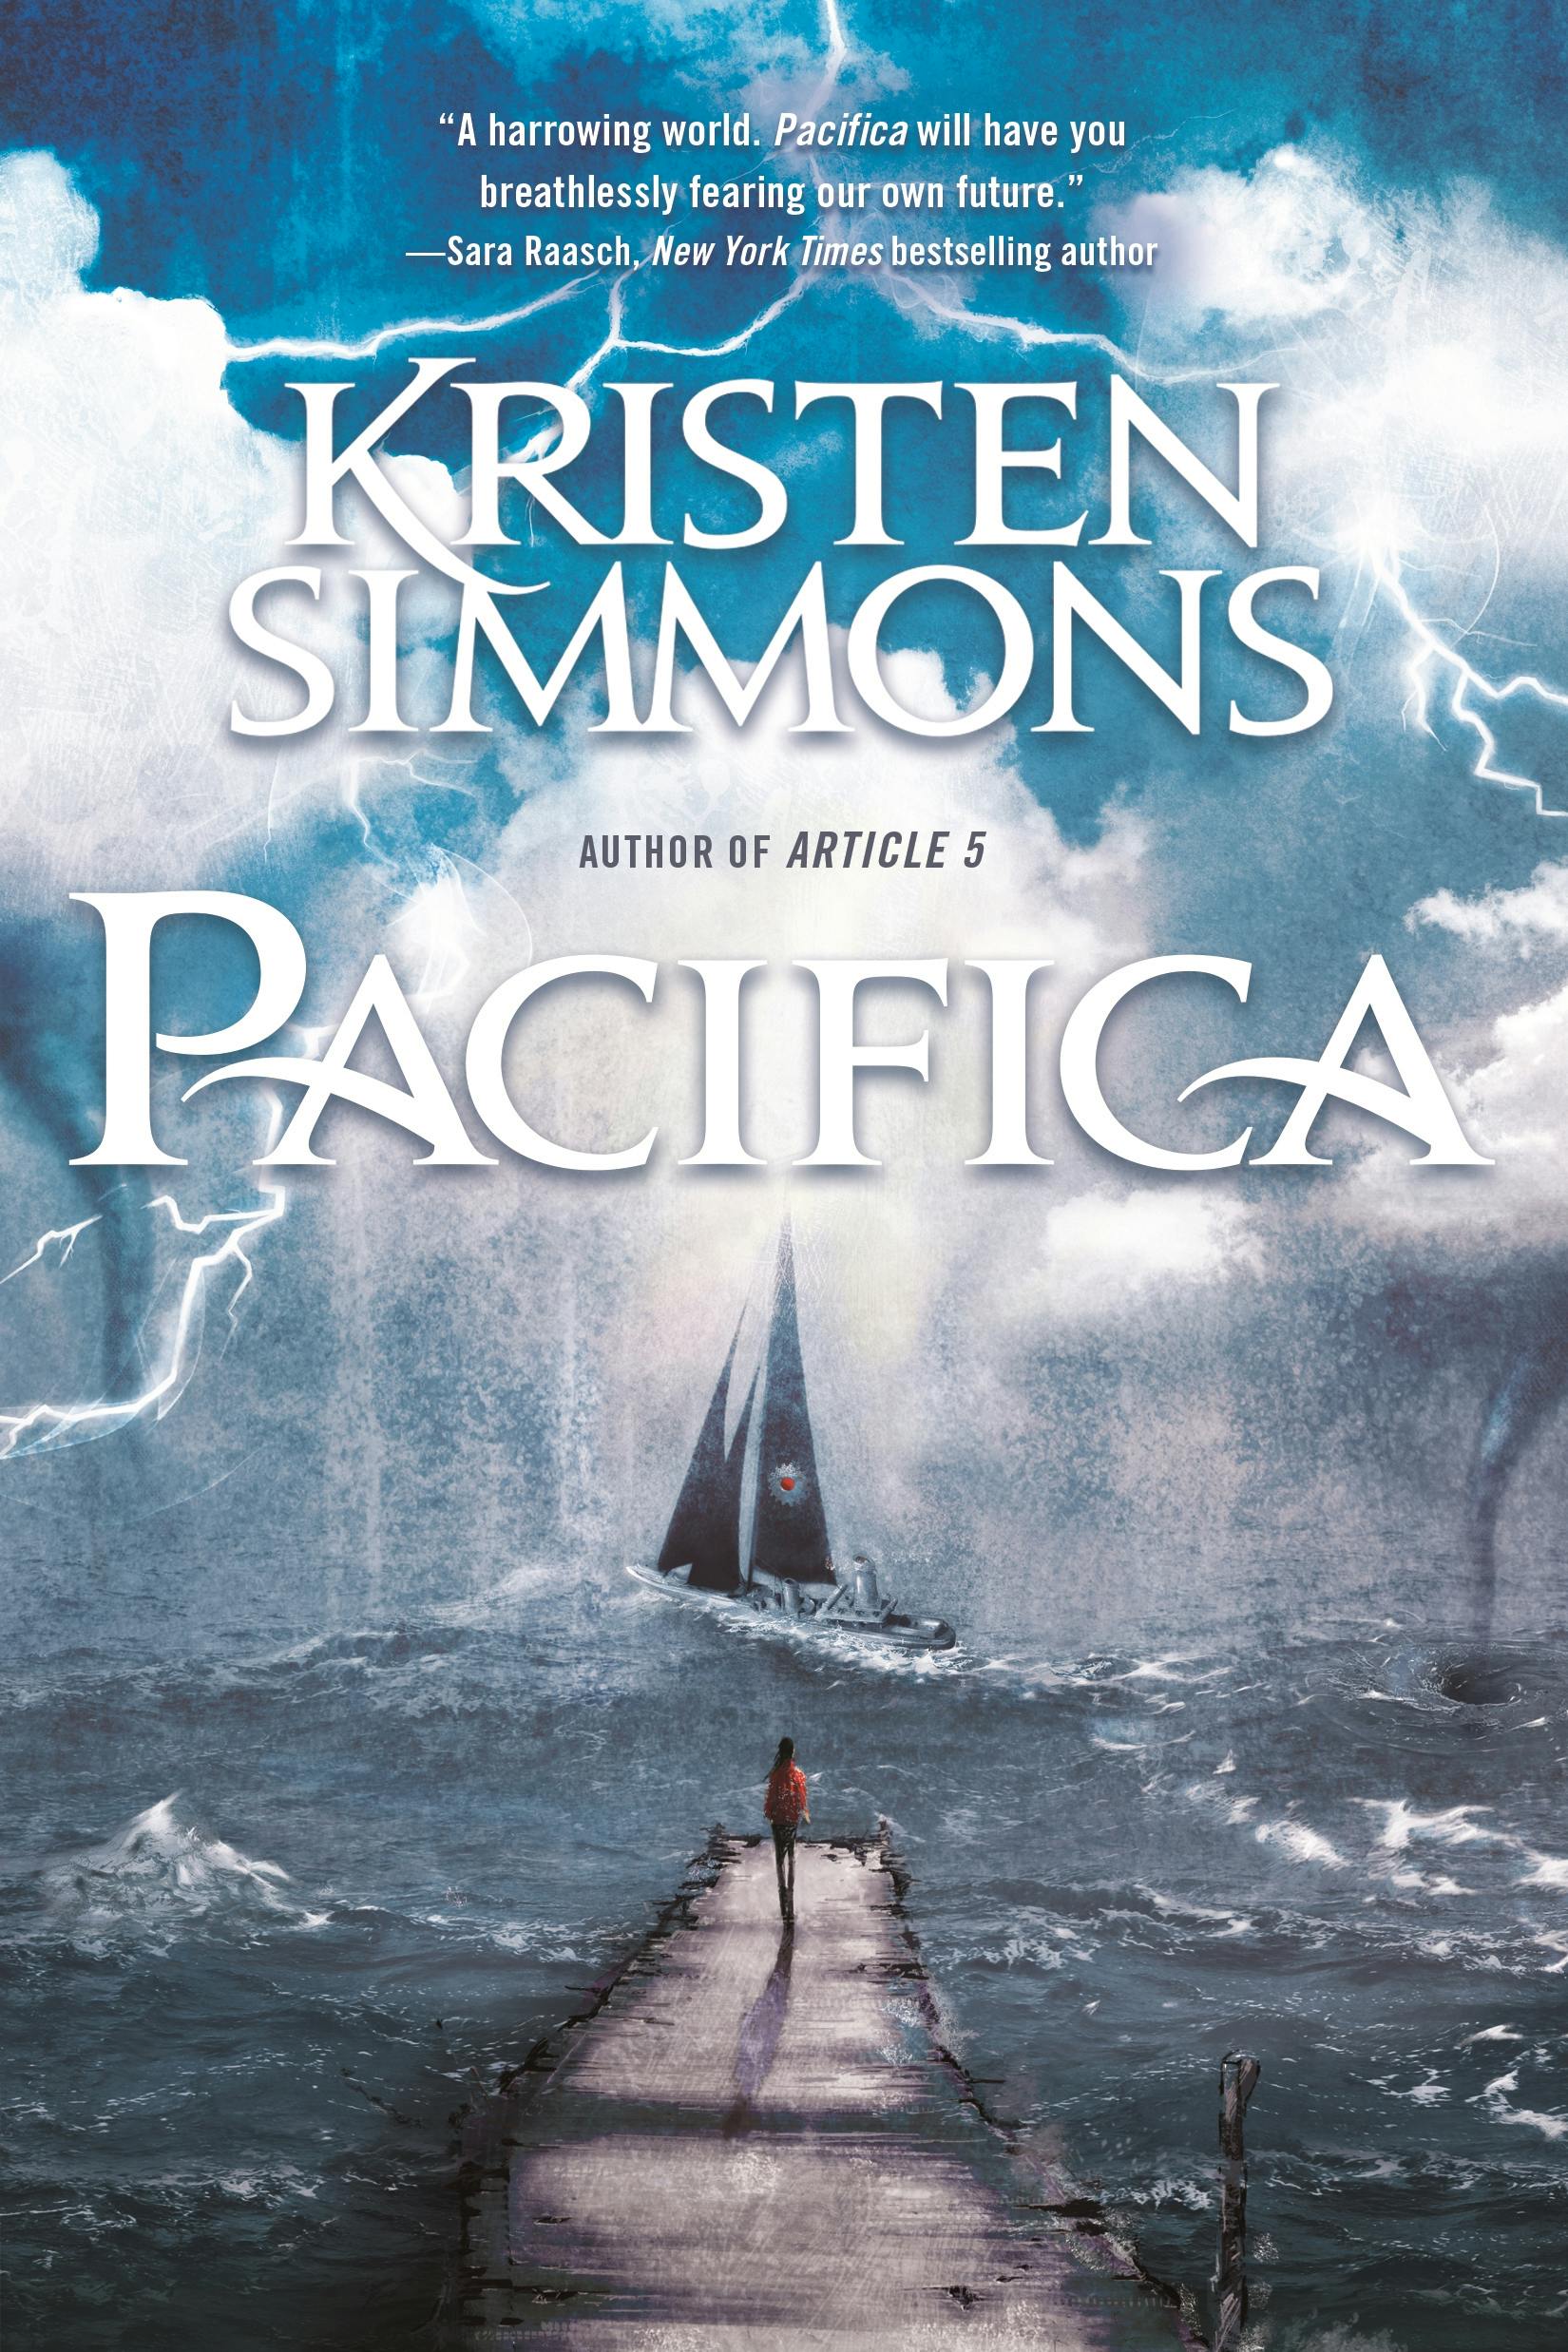 Cover for the book titled as: Pacifica